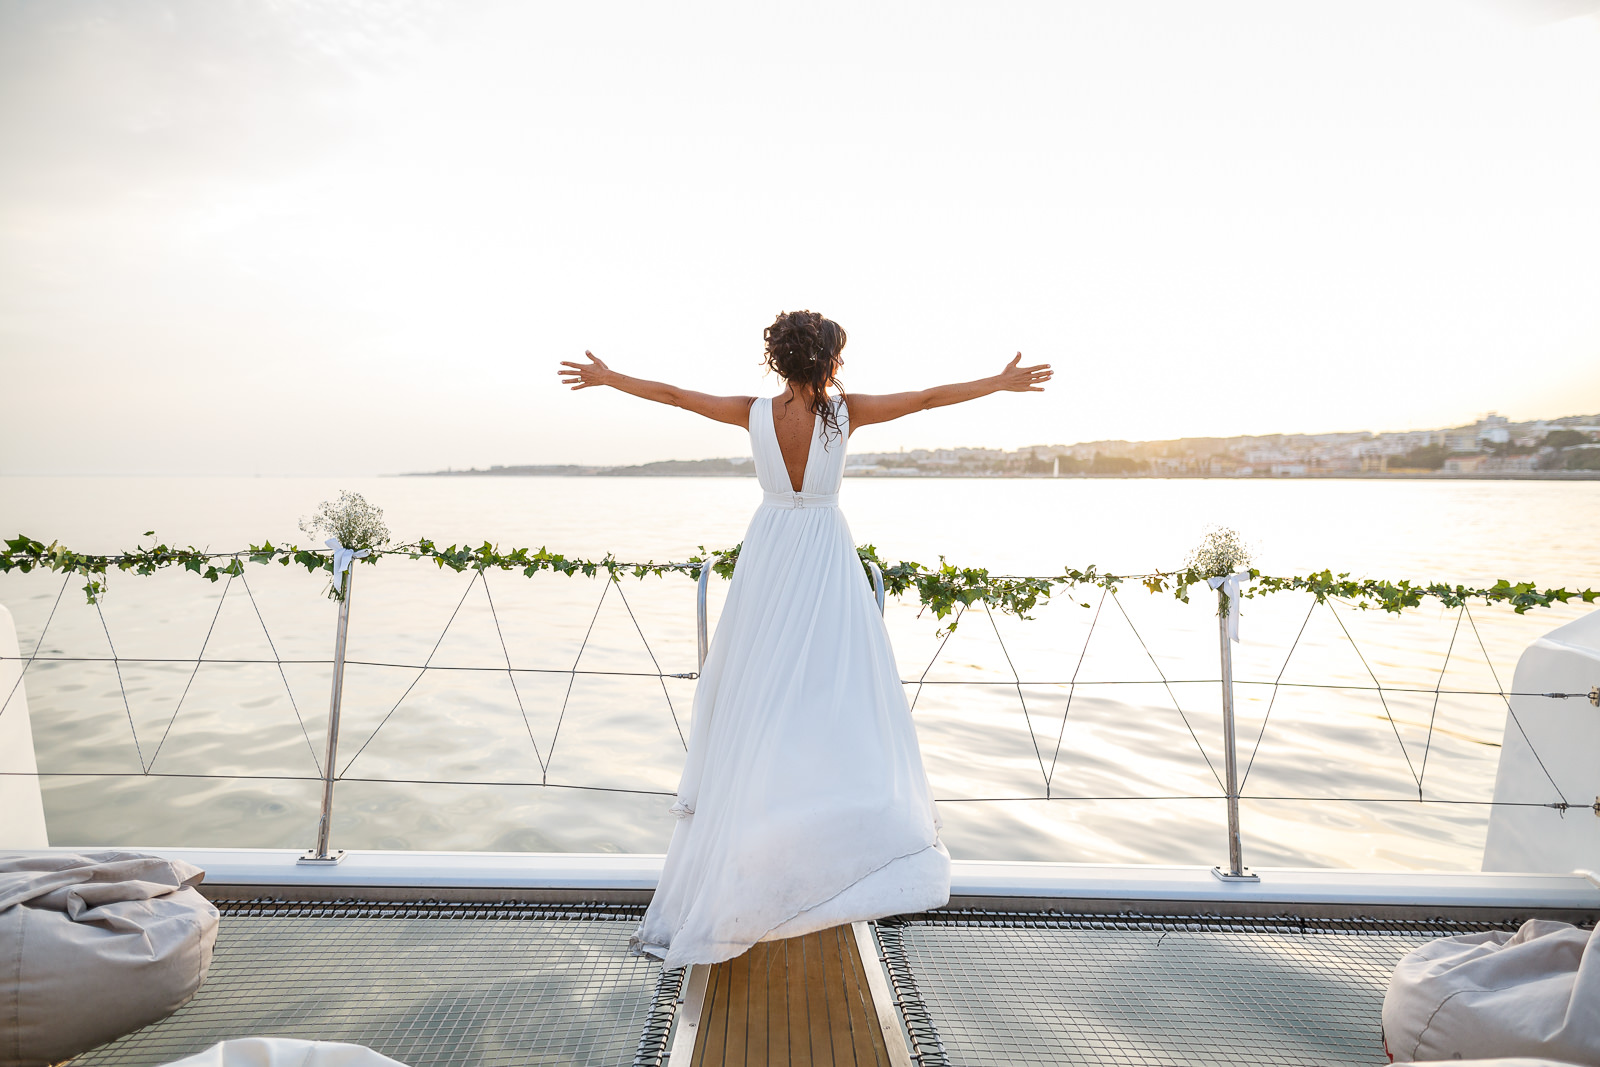 Plan your wedding on a boat in Lisbon